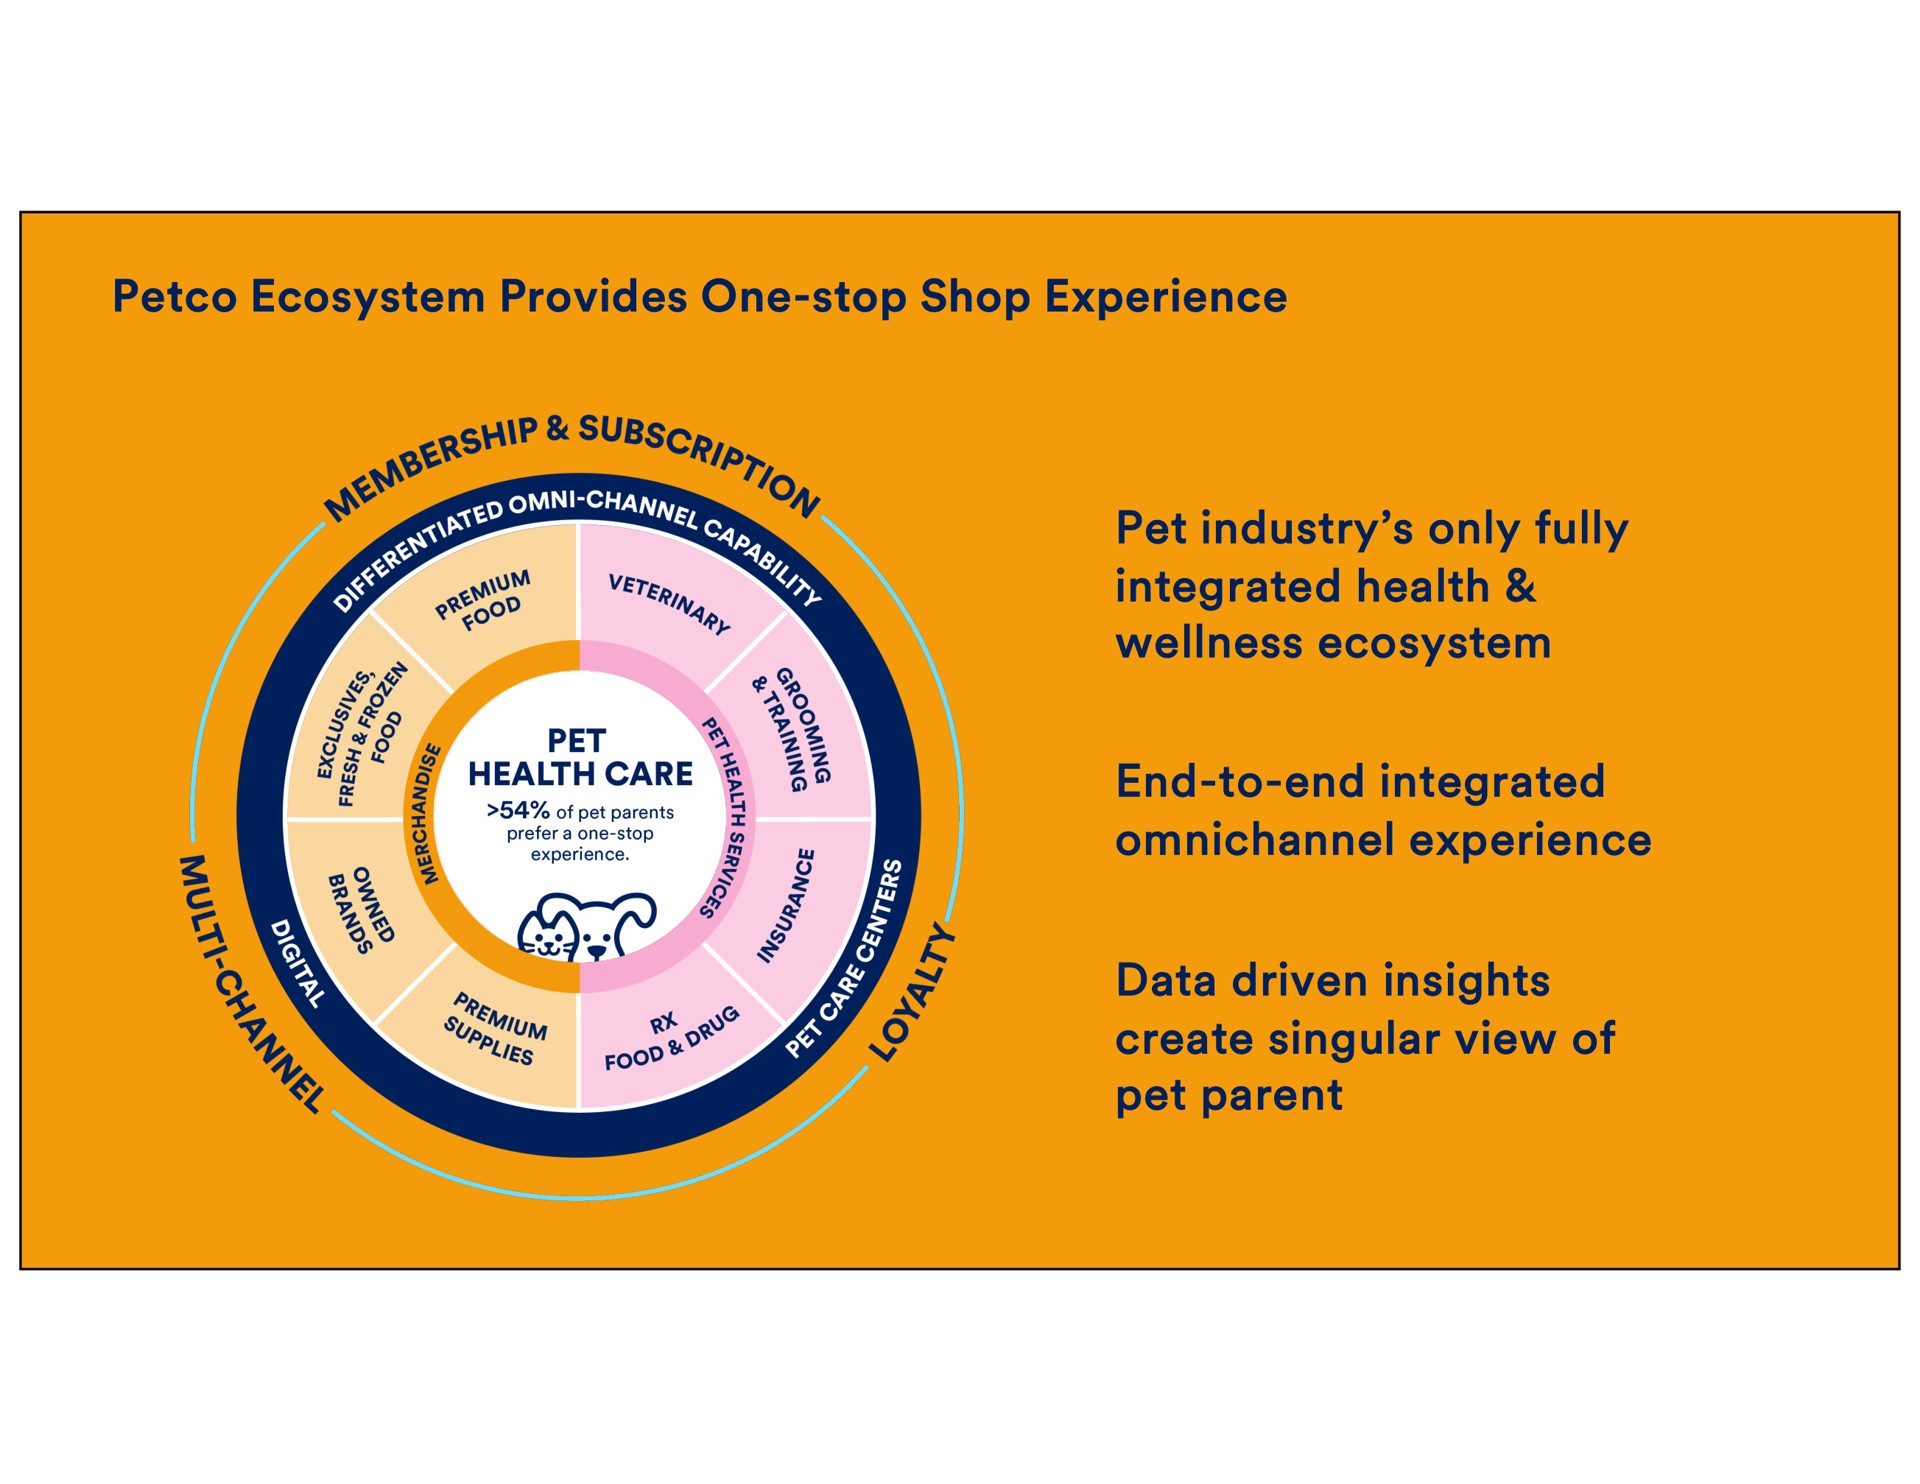 ecosystem provides one stop shop experience pet industry only fully integrated health wellness ecosystem end to end integrated experience data driven insights create singular view of pet parent care parents prefer a | Petco